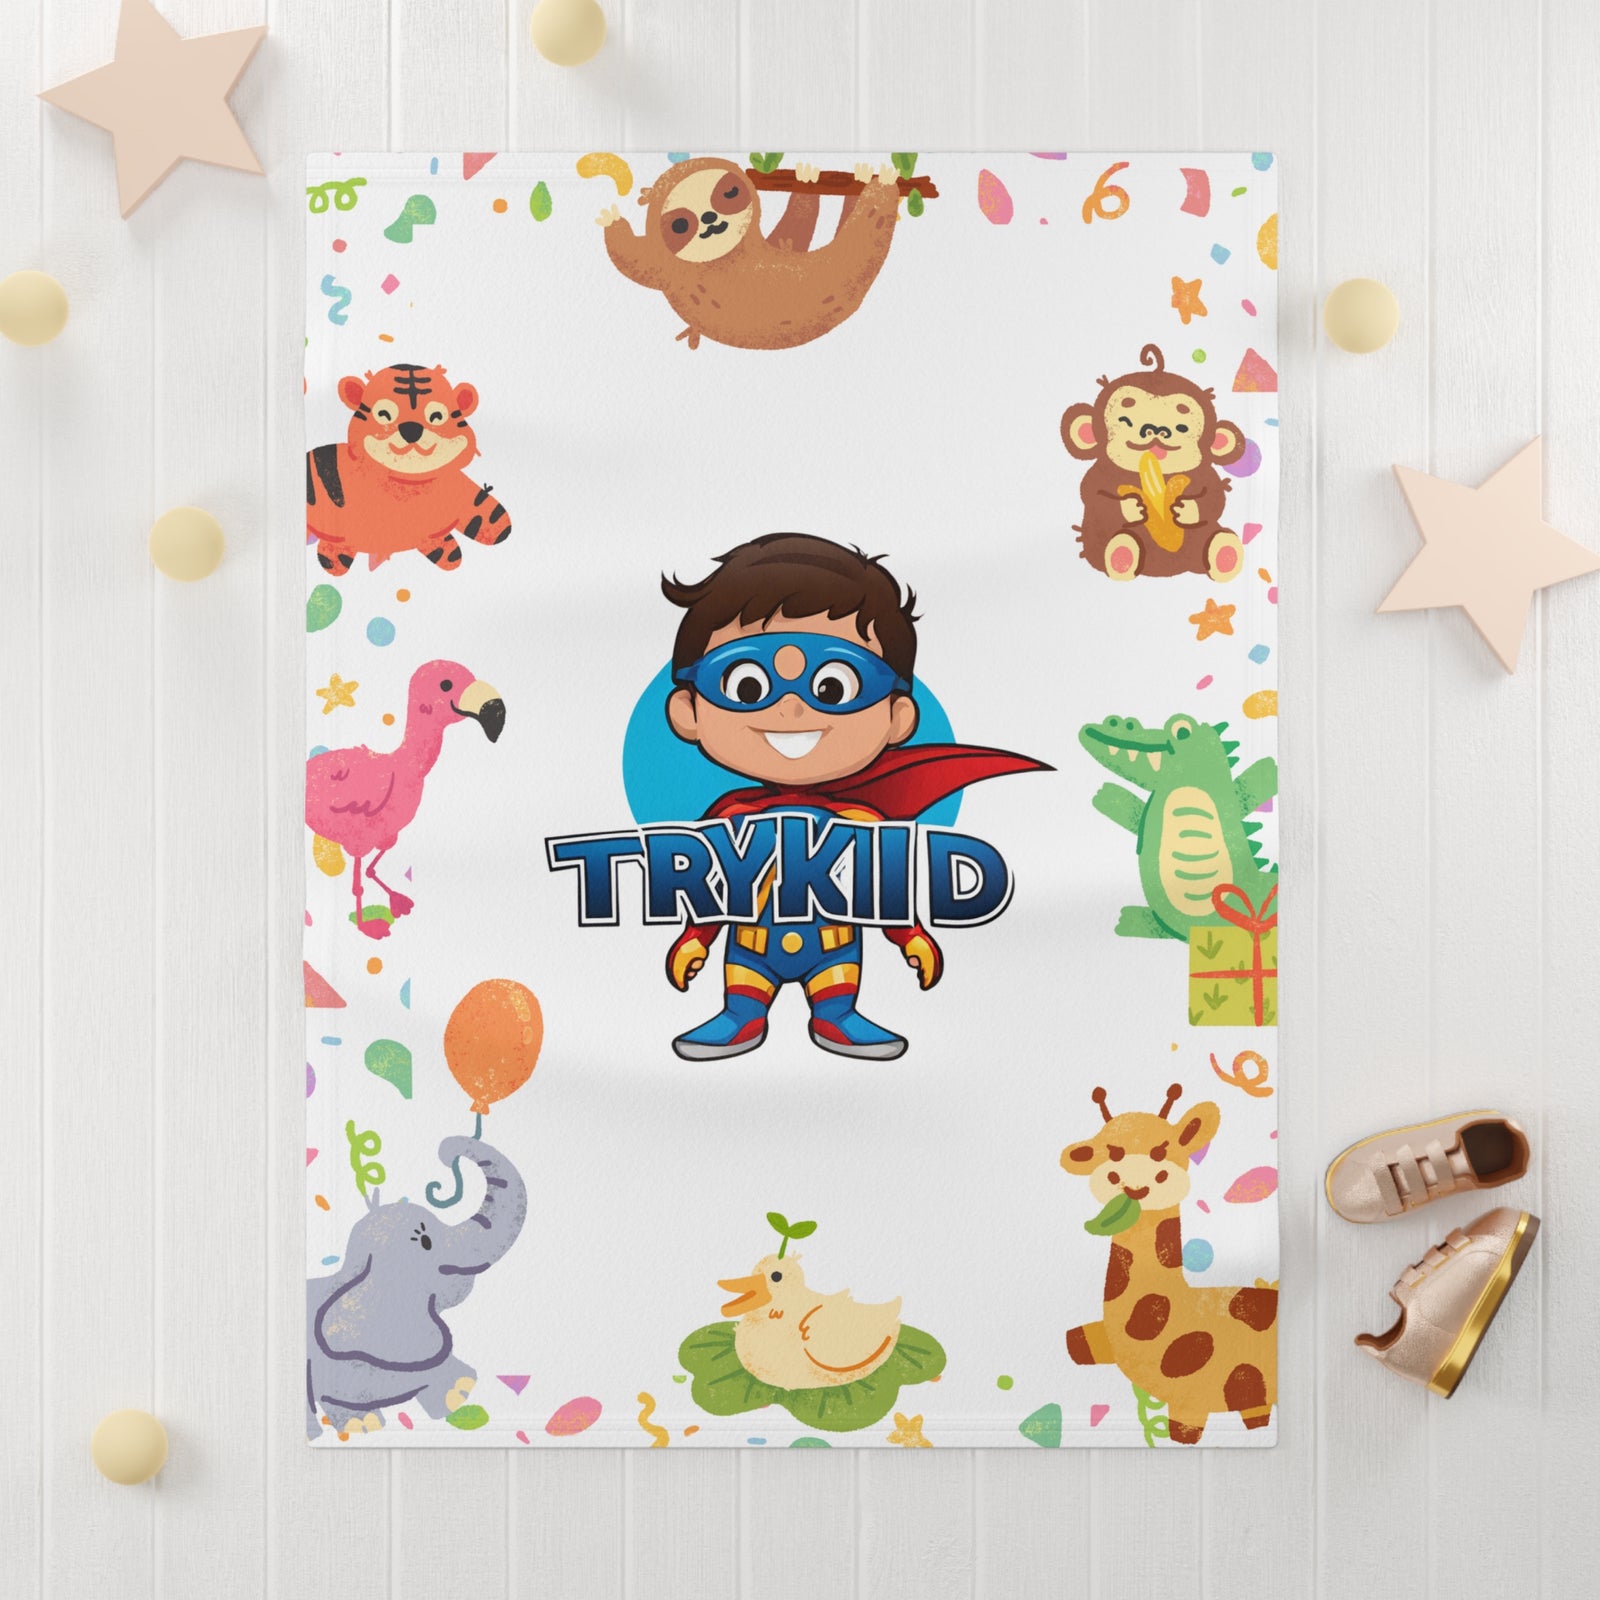 Experience Snuggly Bliss with Our Soft Fleece Baby Blanket, Adorned with the Charming TryKid Logo - A Cuddly Essential for Precious Moments!